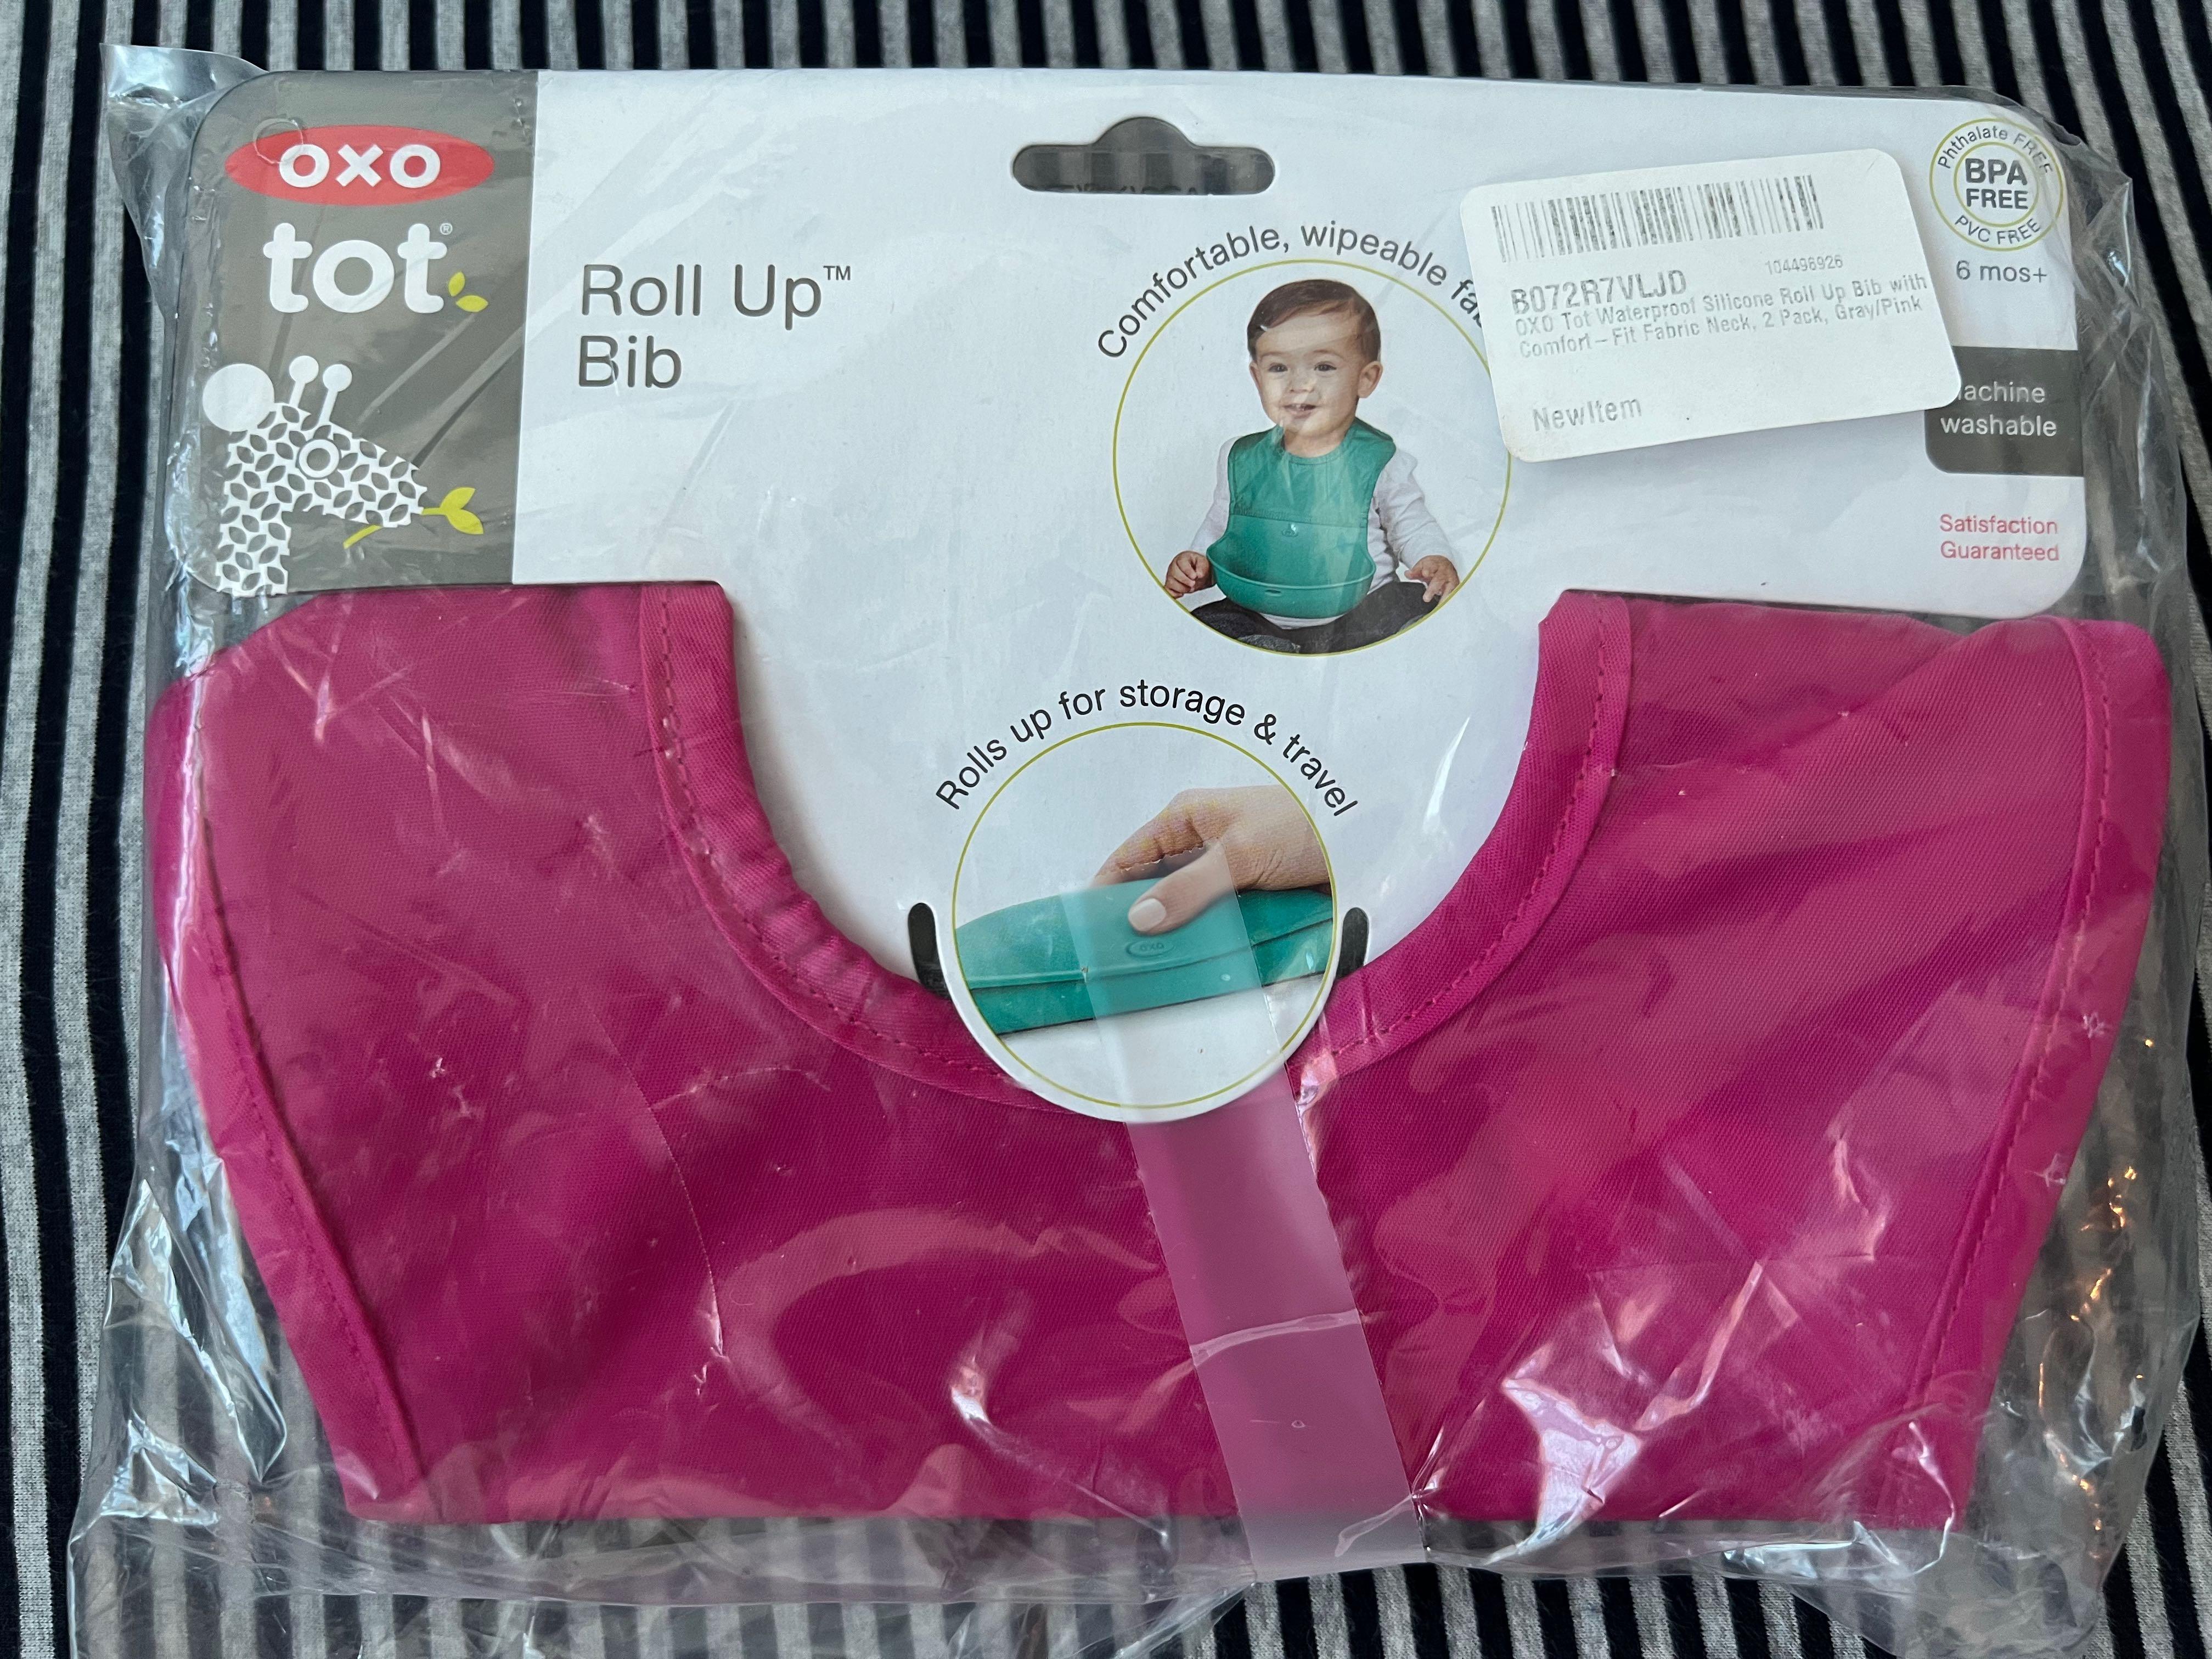 Pink/Teal OXO Tot 2-Piece Waterproof Silicone Roll Up Bib with Comfort-Fit Fabric Neck